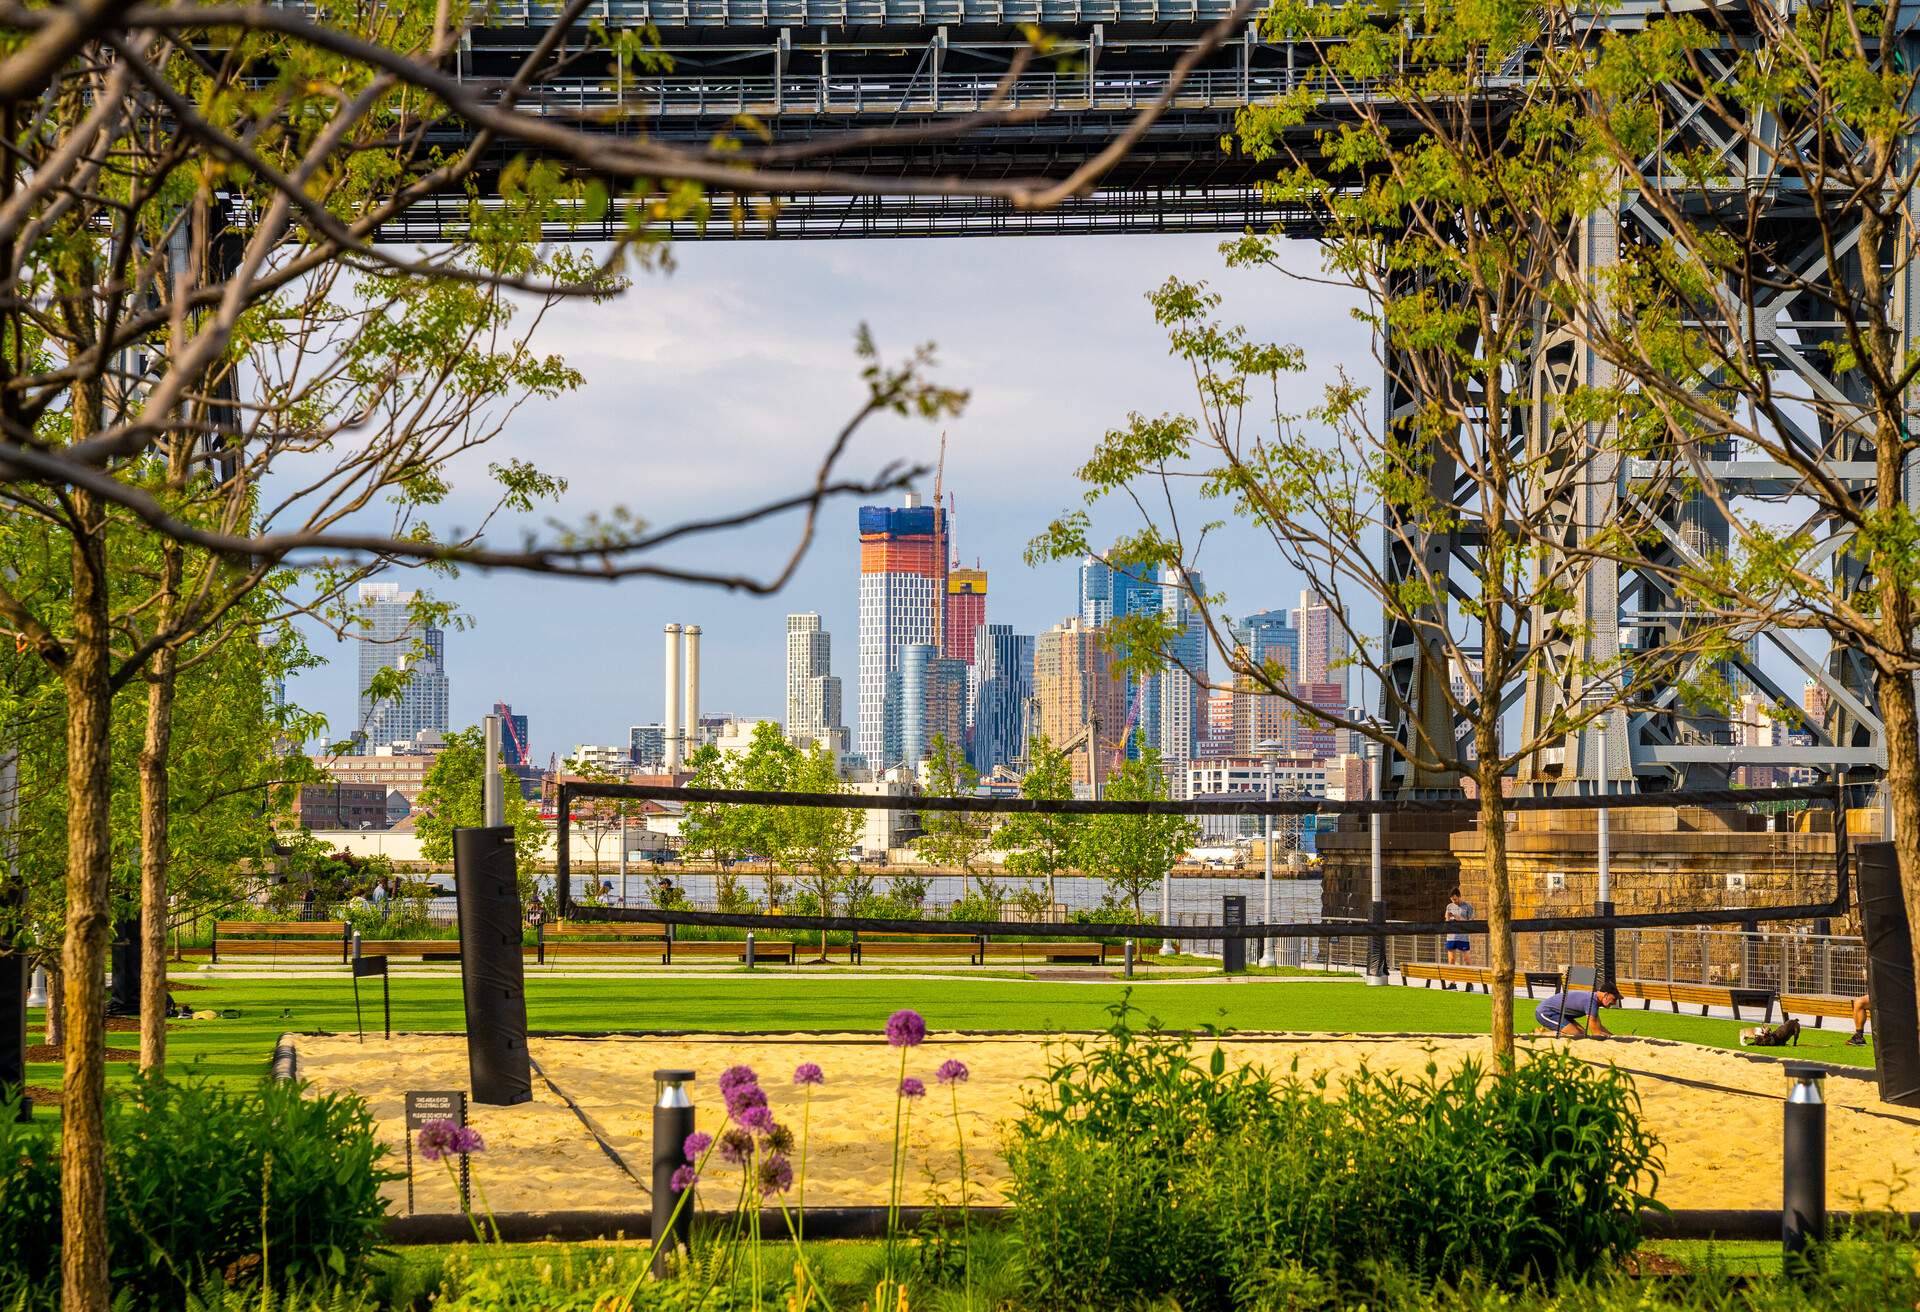 View of Manhattan, New York, from Domino Park in Brooklyn. New York is the largest city by population in the USA and has millions of yearly visitors.